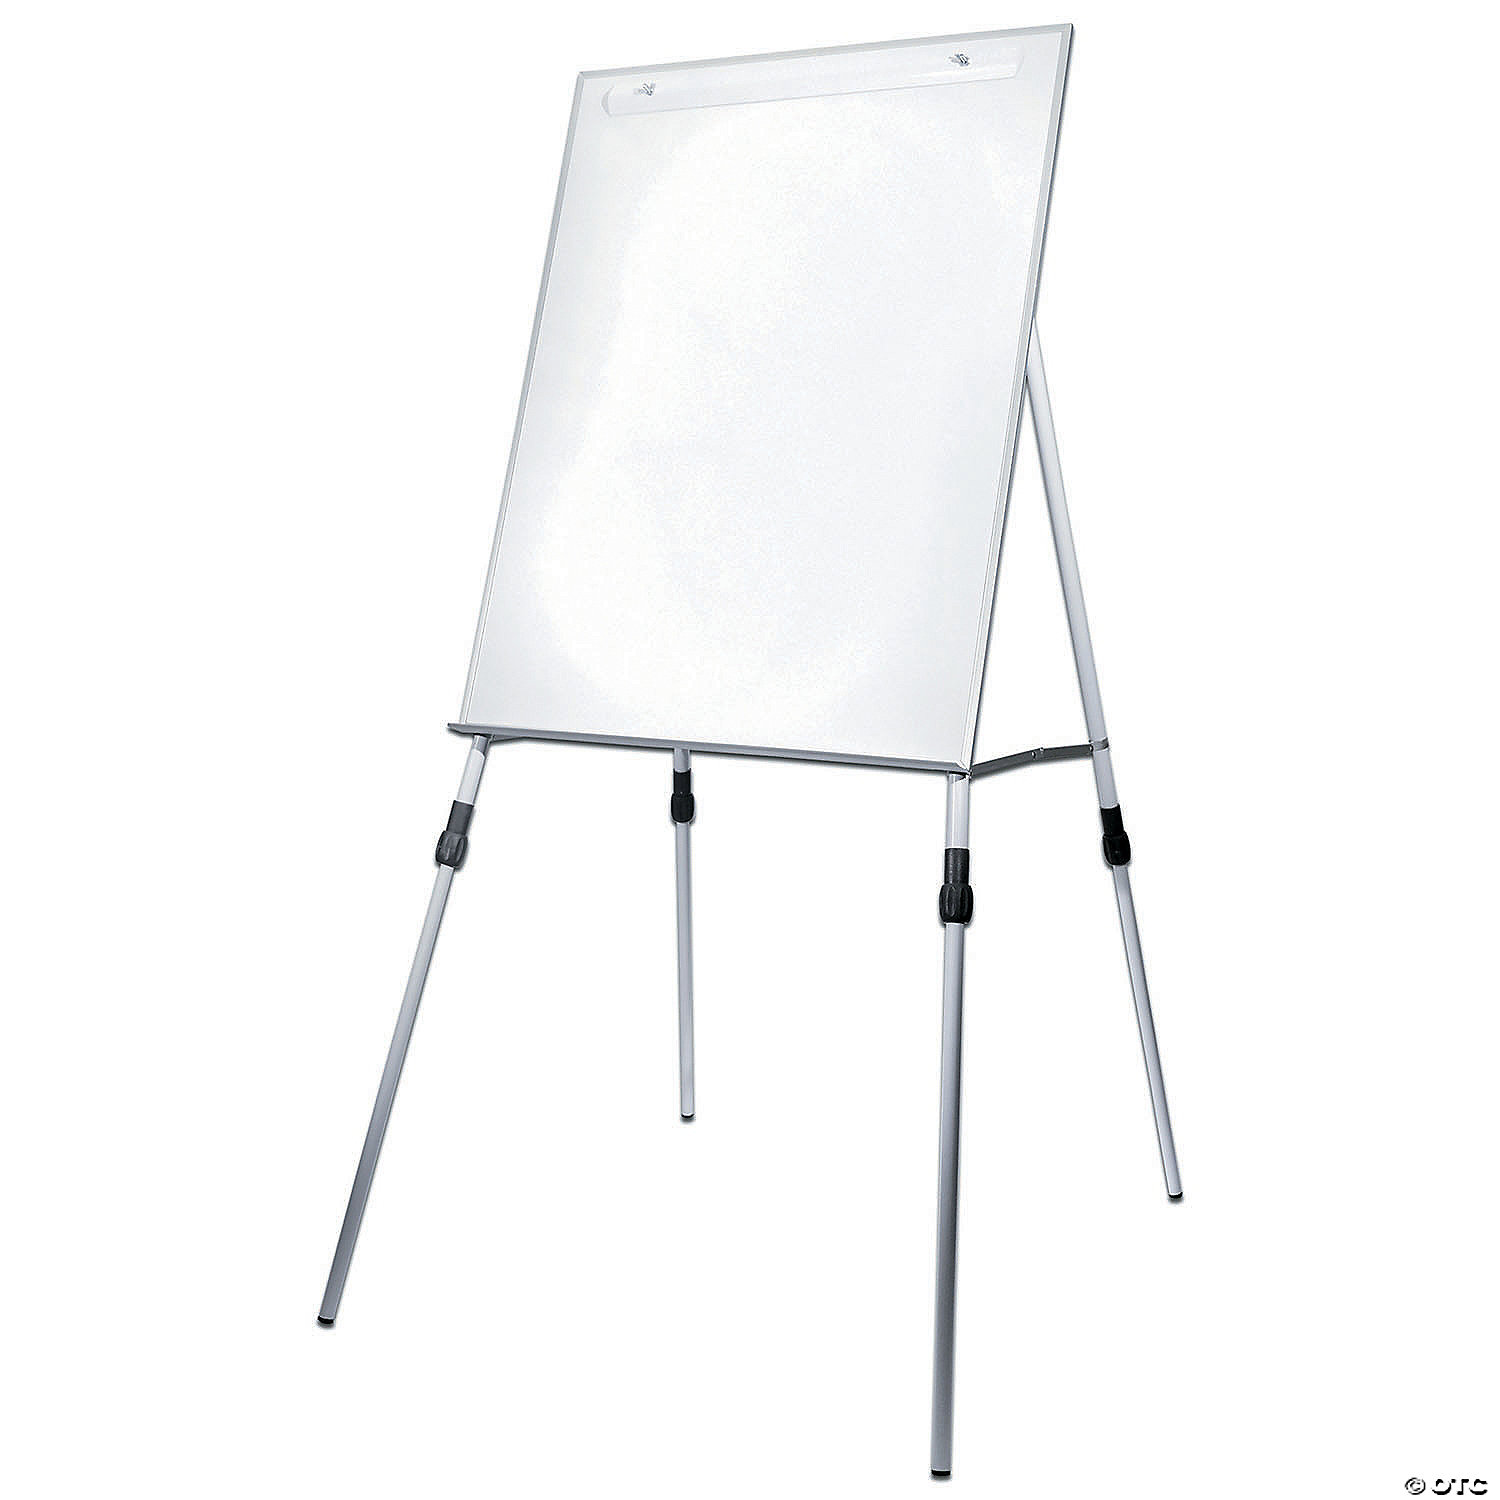 Flipside Products Adjustable Dry Erase Easel Style Dry Erase Board 18253 